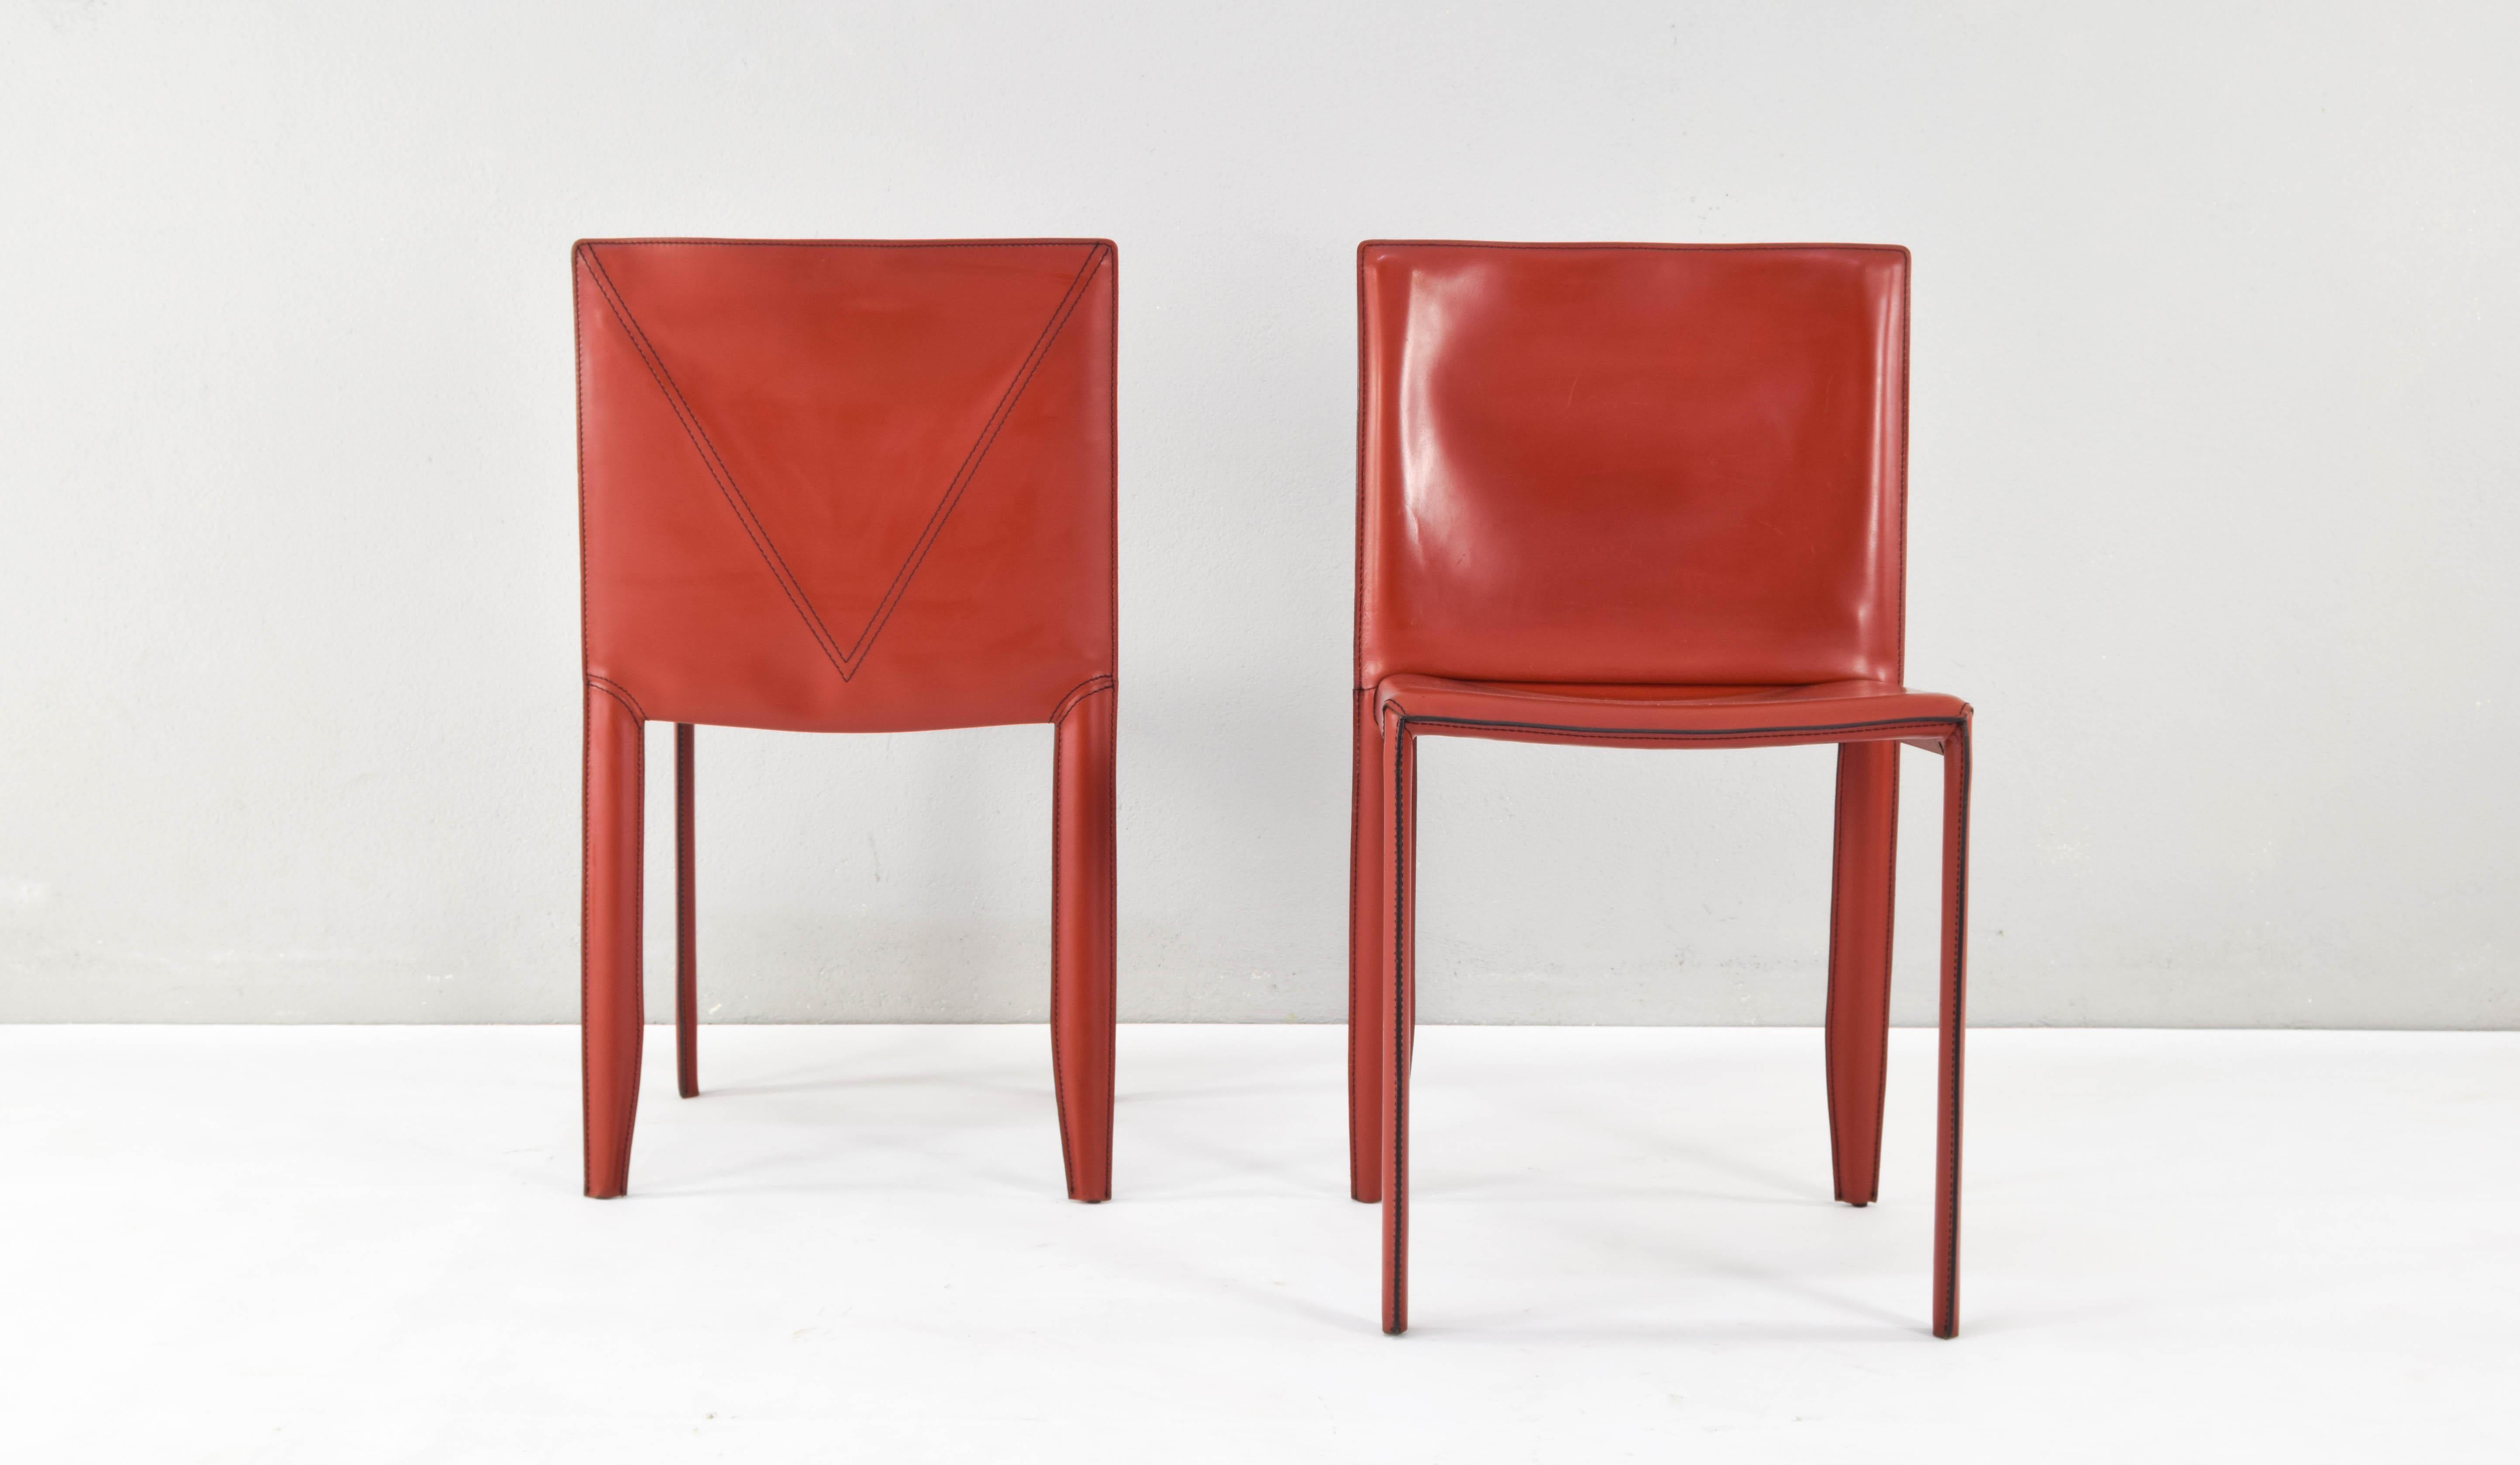 Late 20th Century Piuma Italian Modern Leather Chairs Set of Two by Studio Kronos for Cattelan 90s